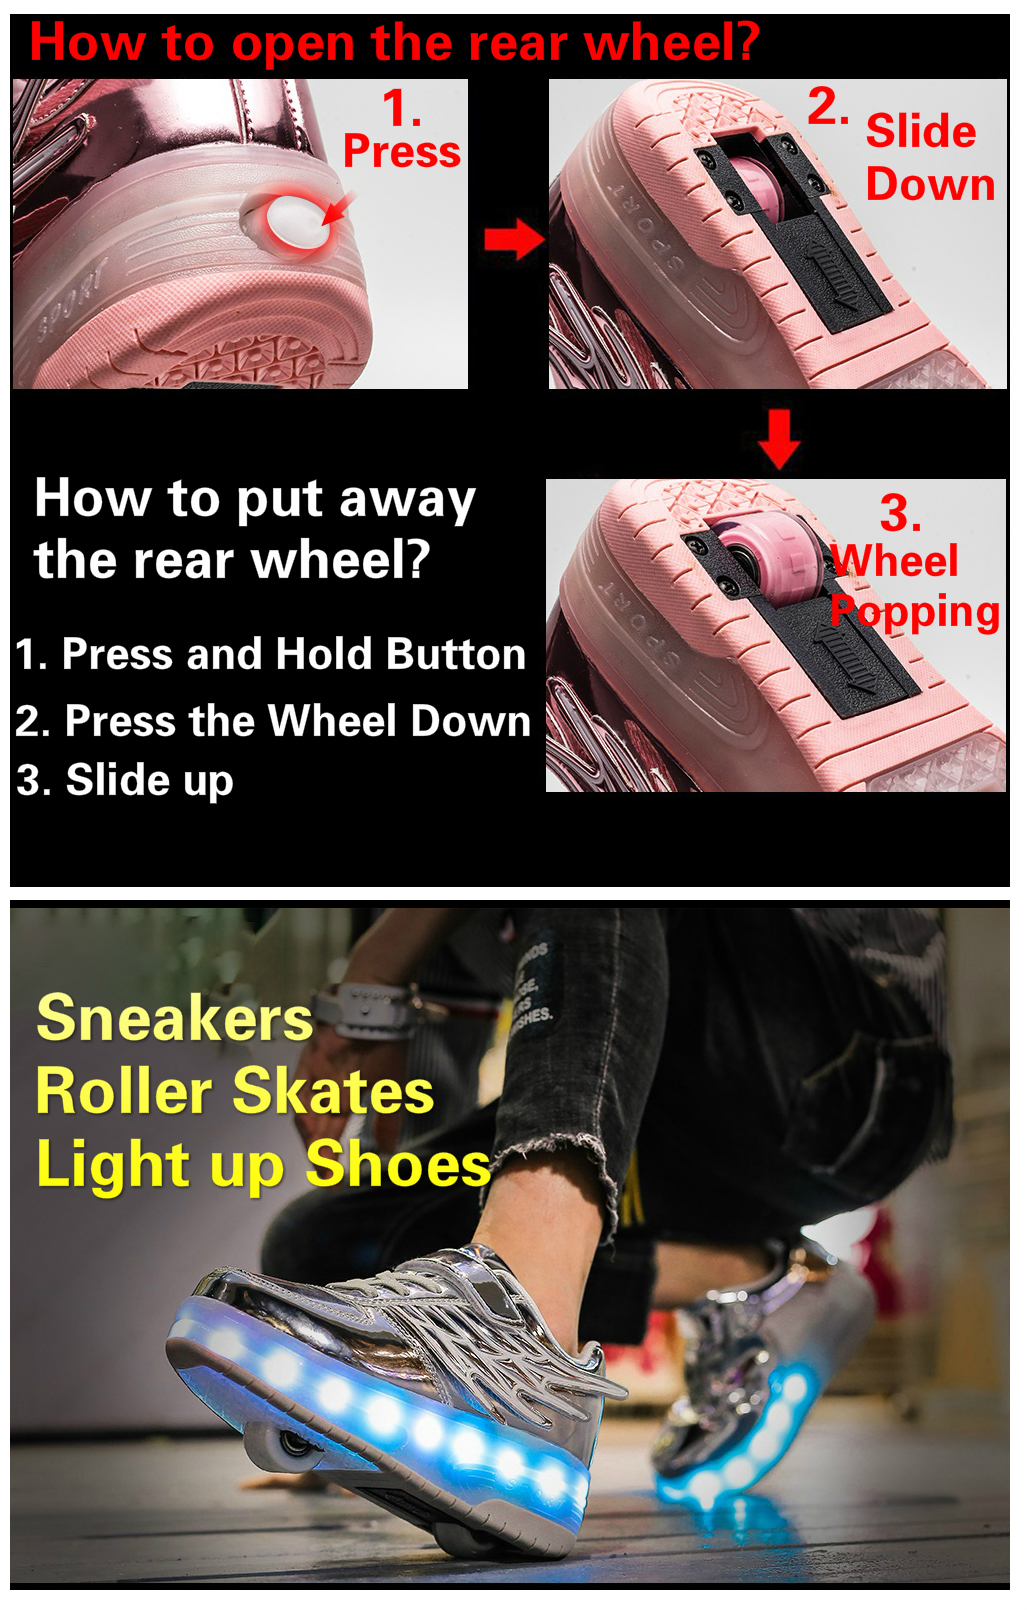 light up shoes with button